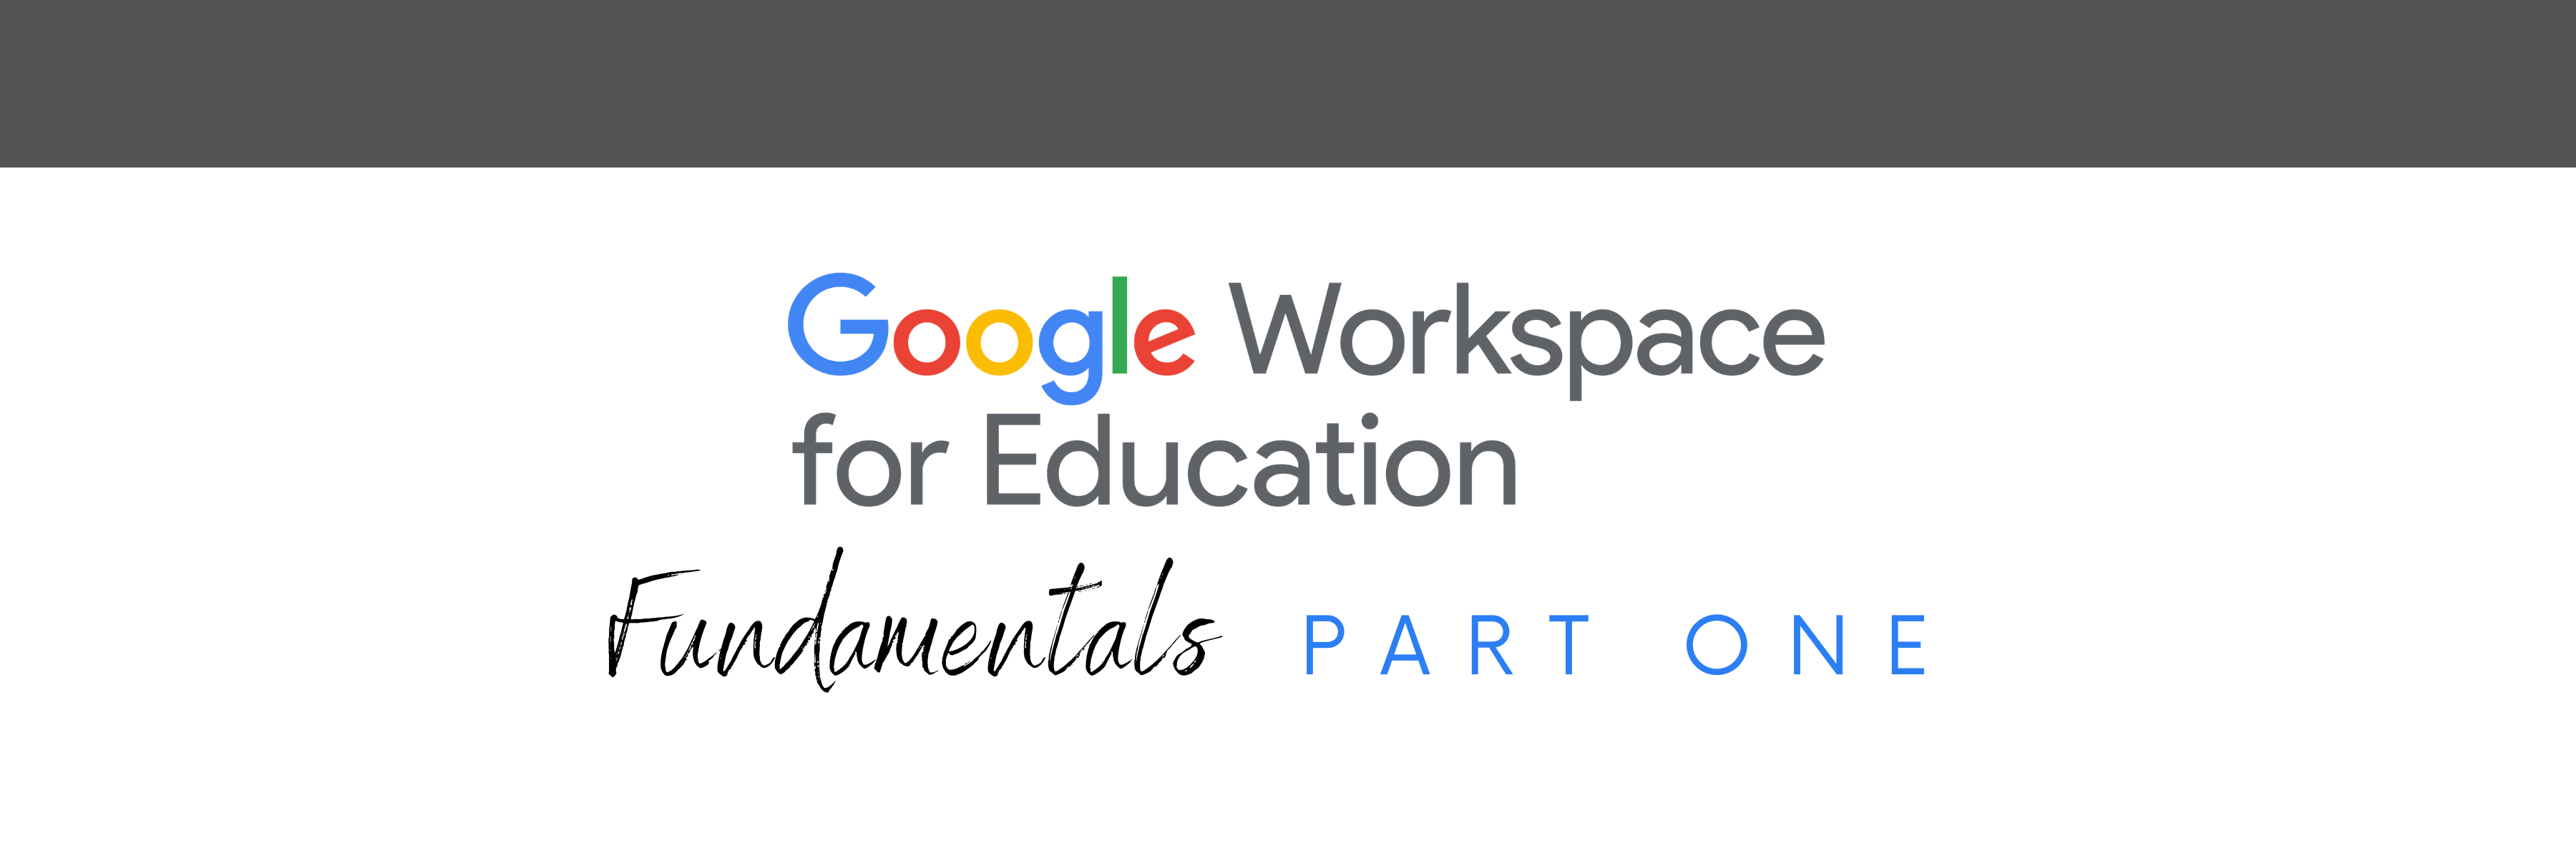 Google Workspace part one course banner